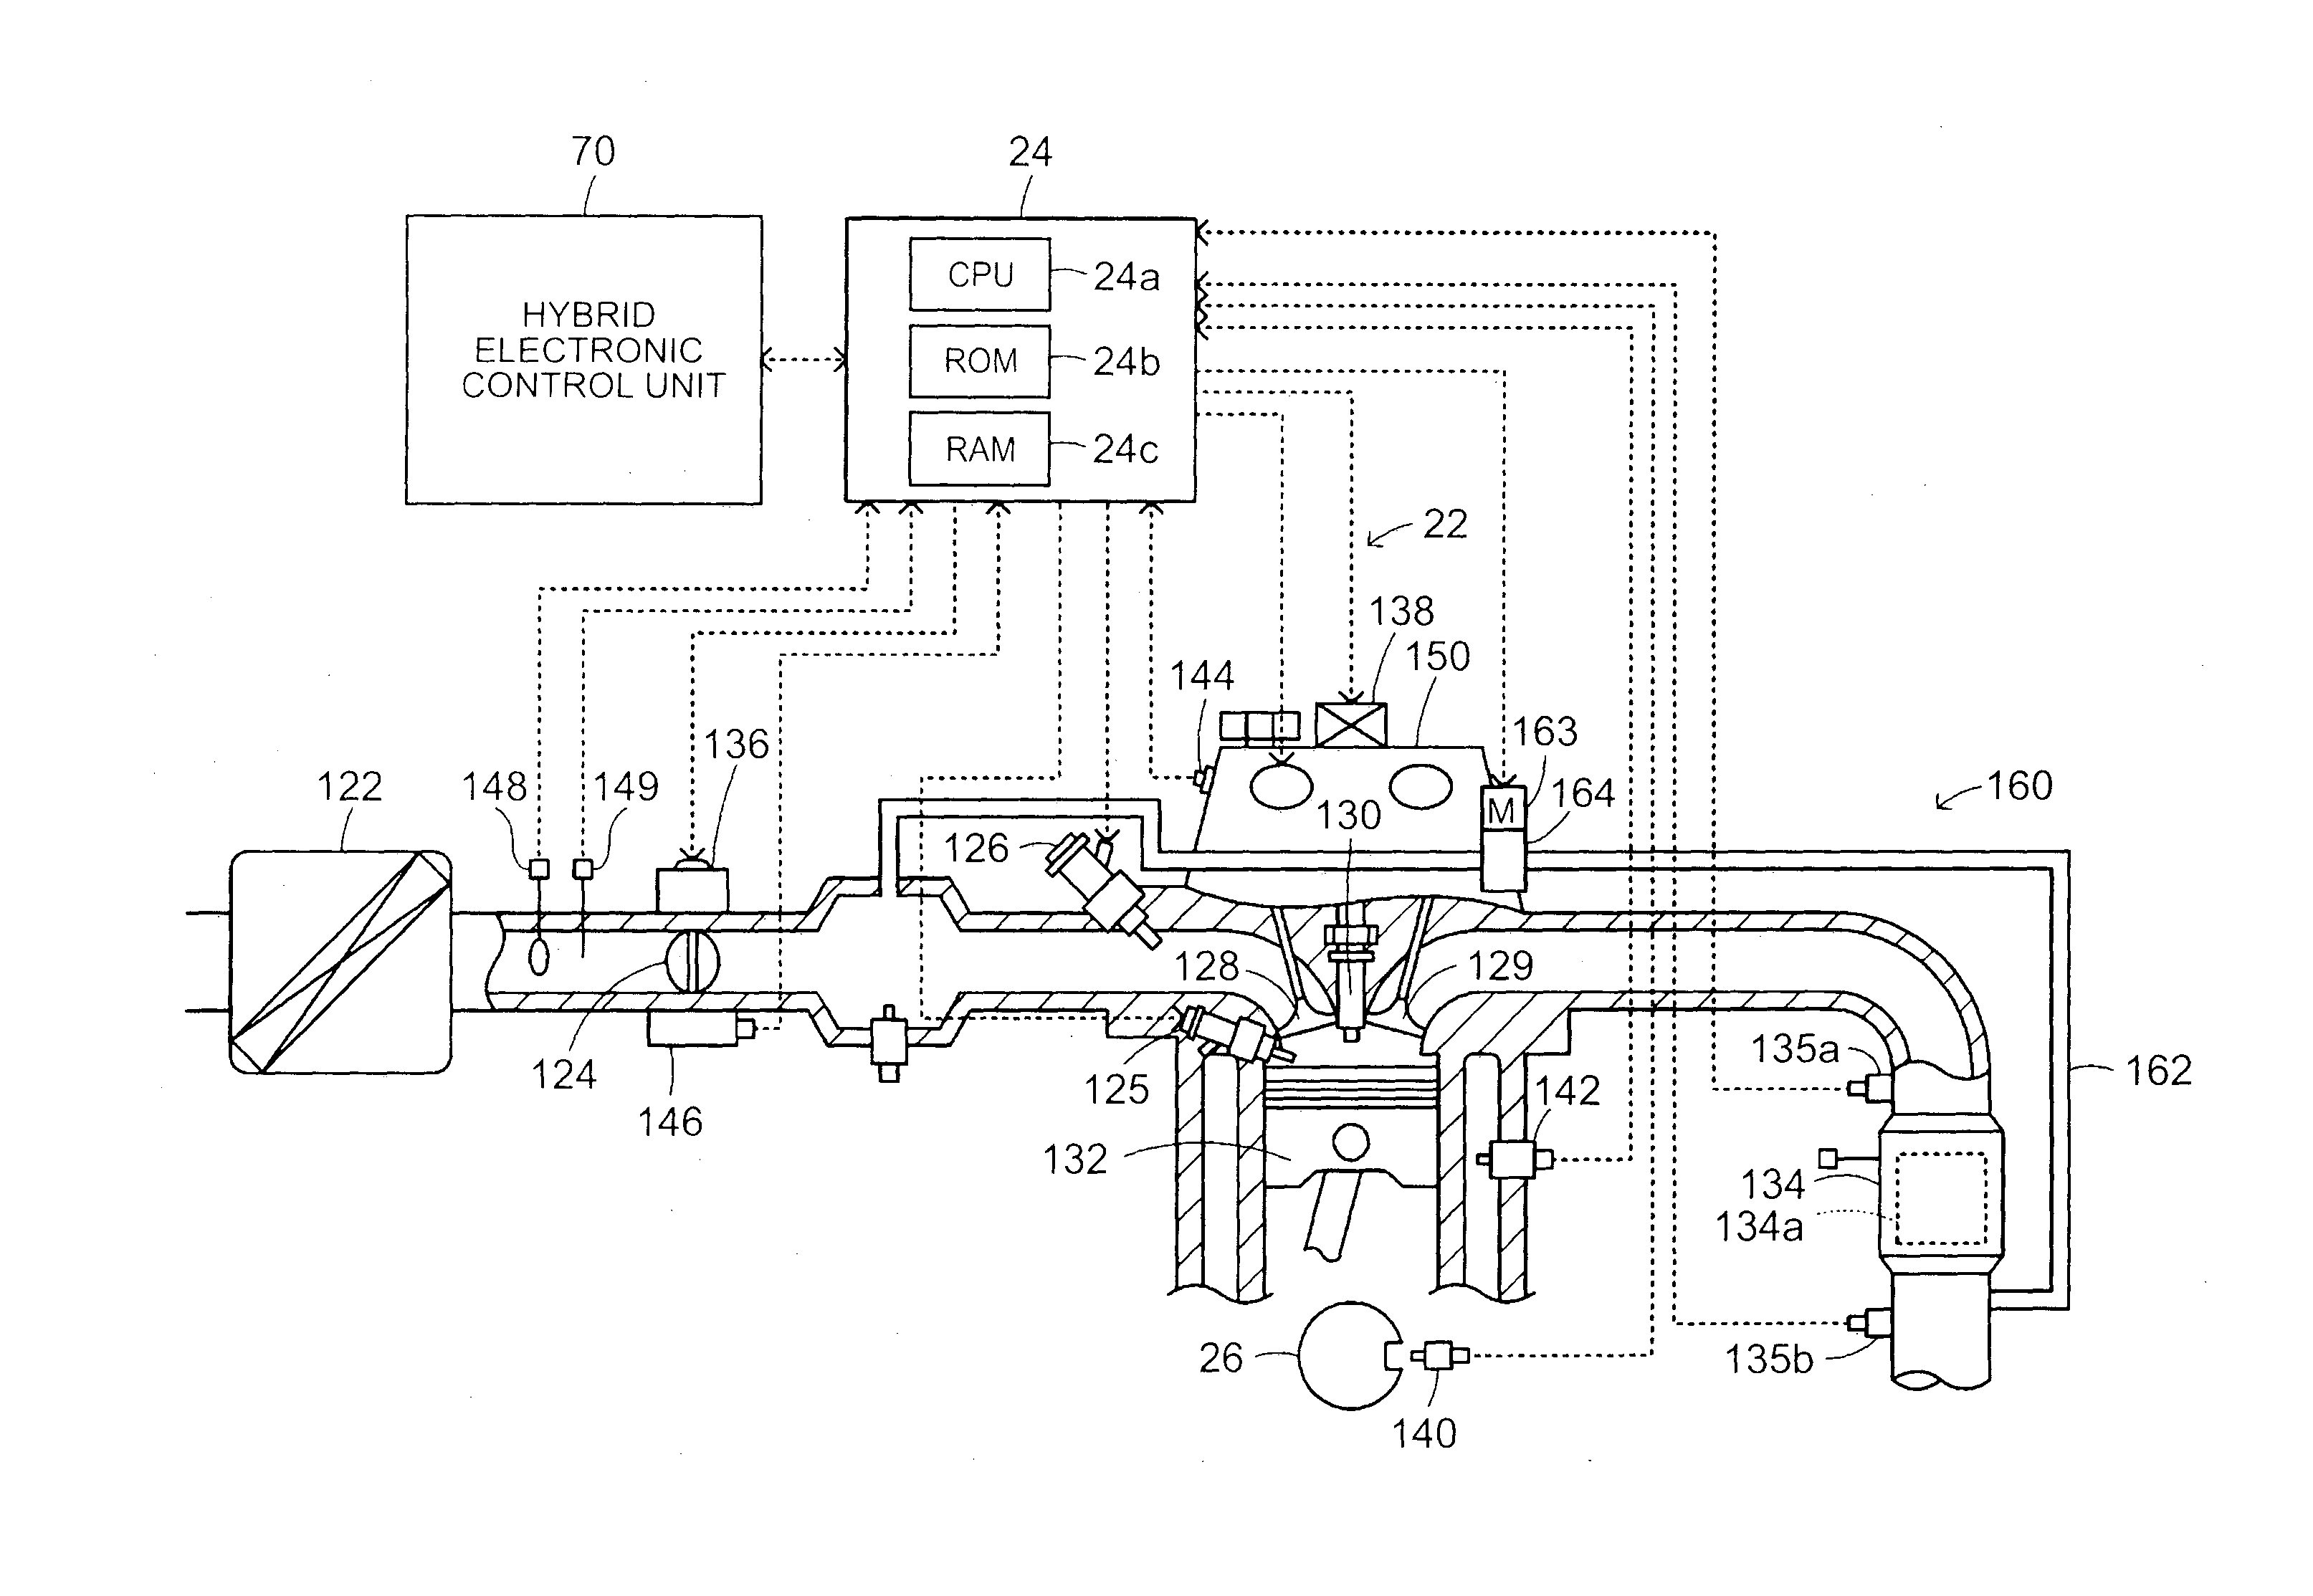 Internal combustion engine control for a hybrid vehicle